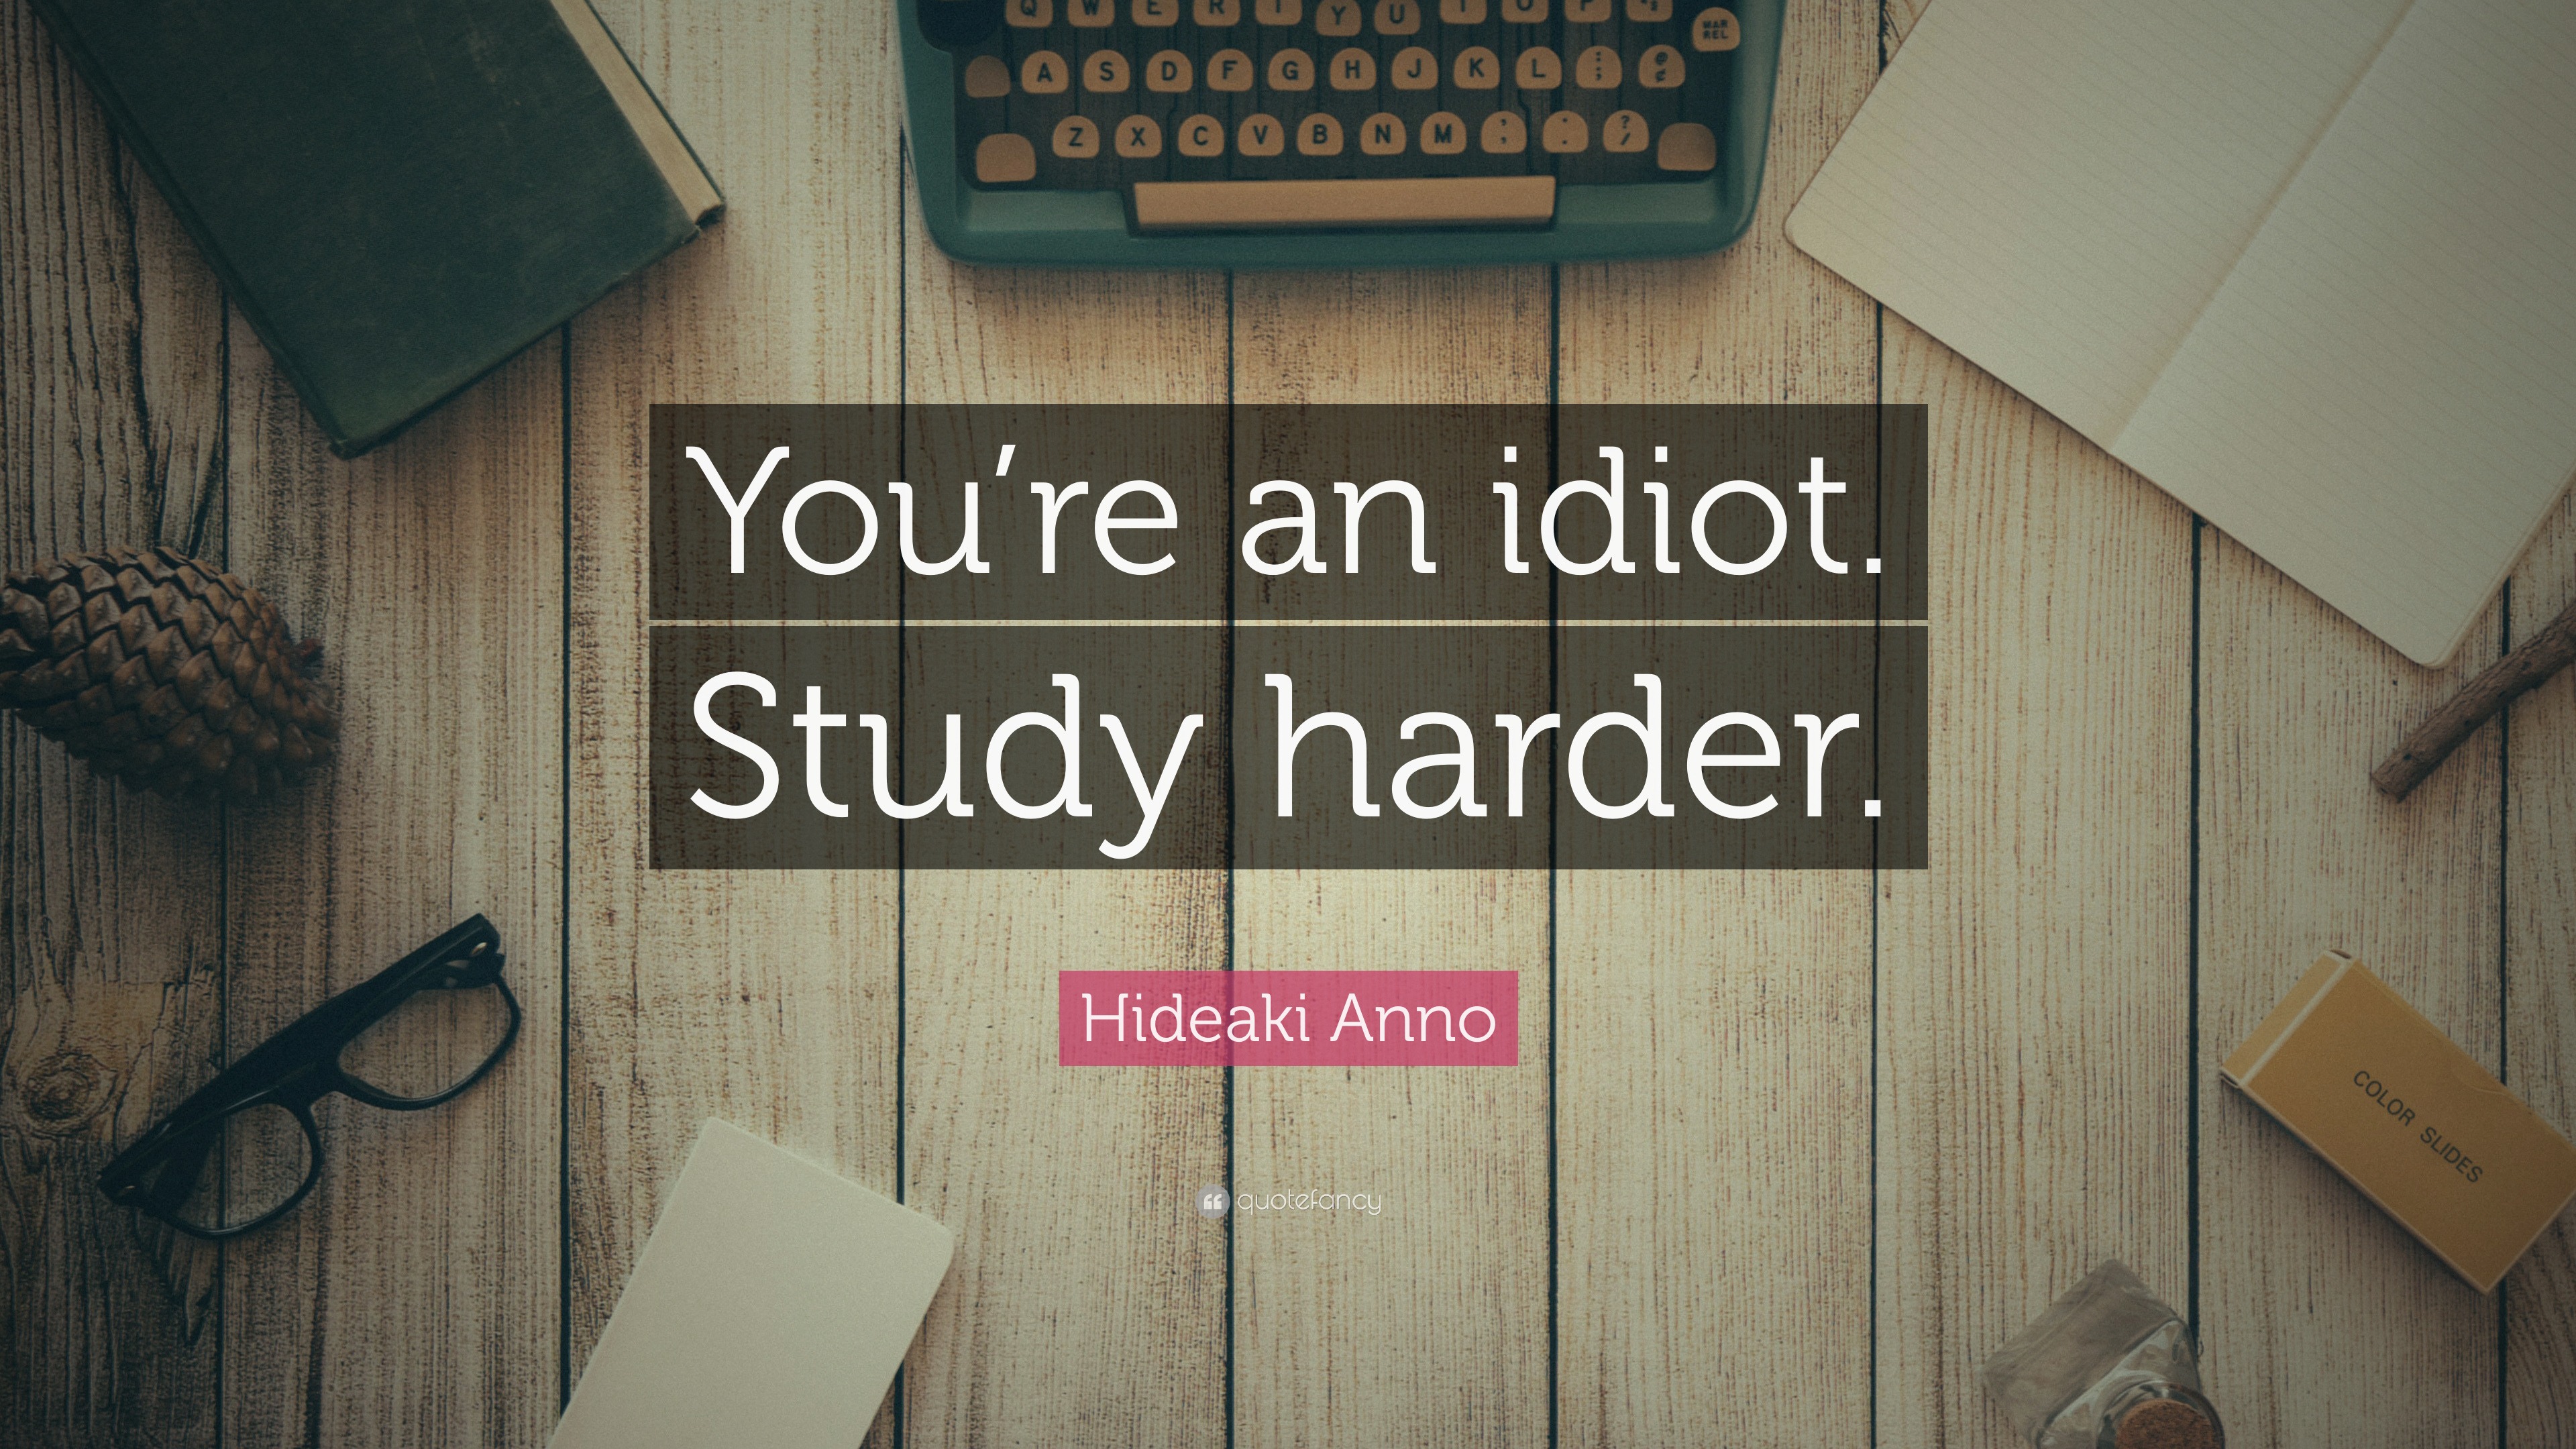 Hideaki Anno Quote: “You're an idiot. Study harder.”